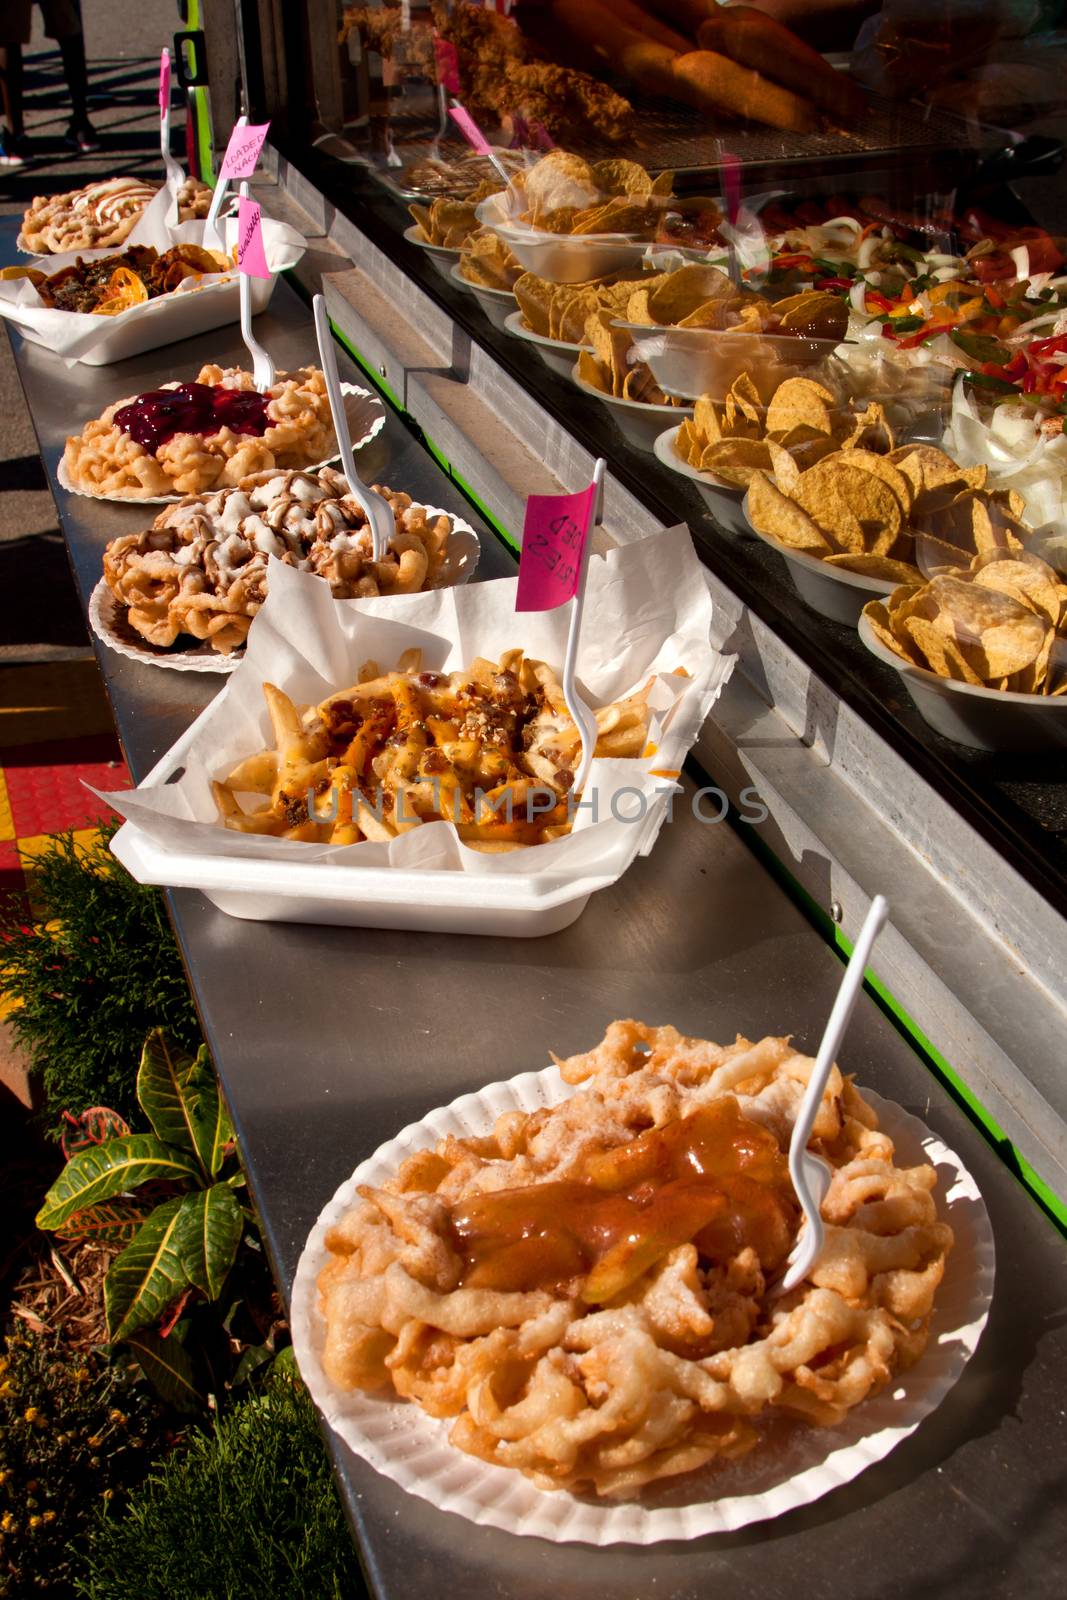 Several funnel cakes are displayed for sale outside a food vendor's booth at a county fair.